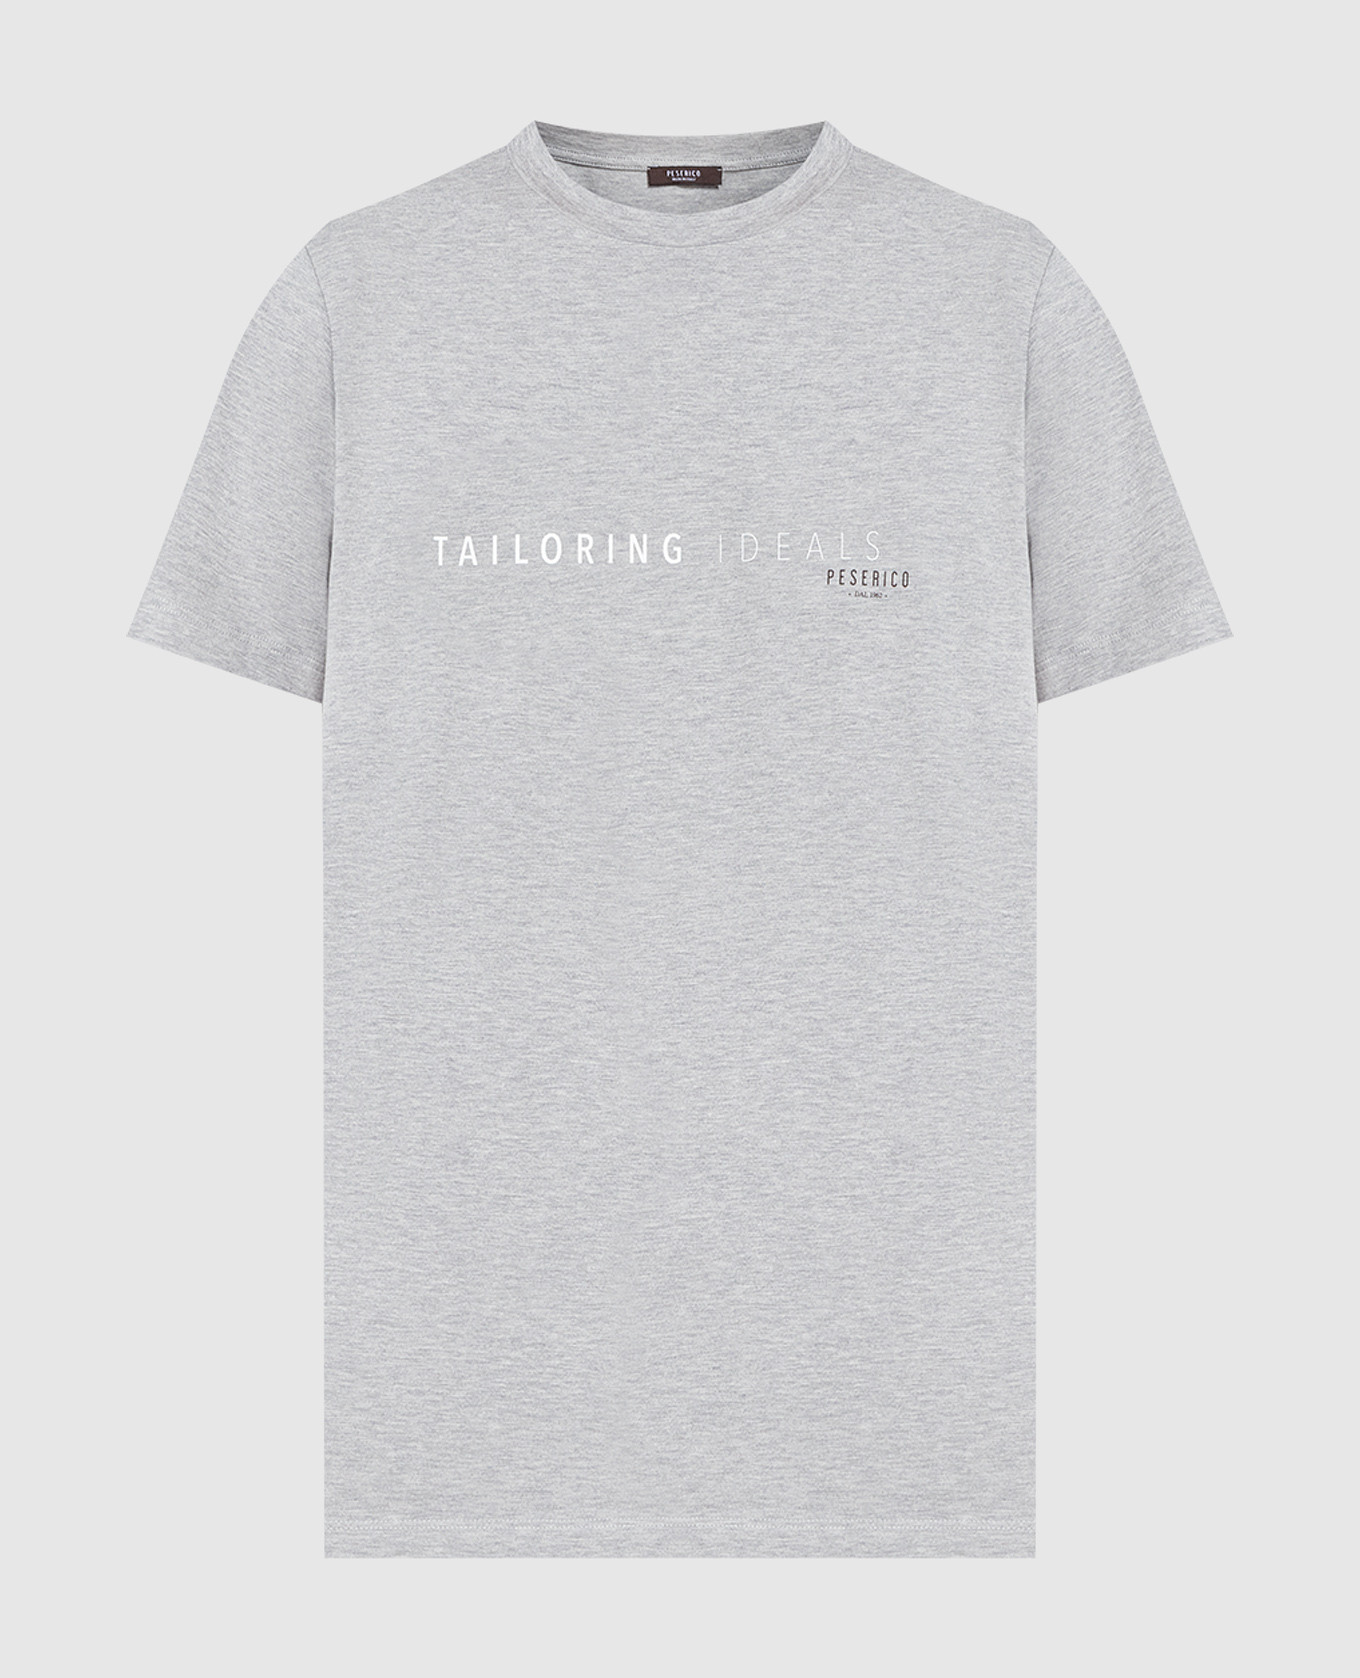 Gray t-shirt with a print